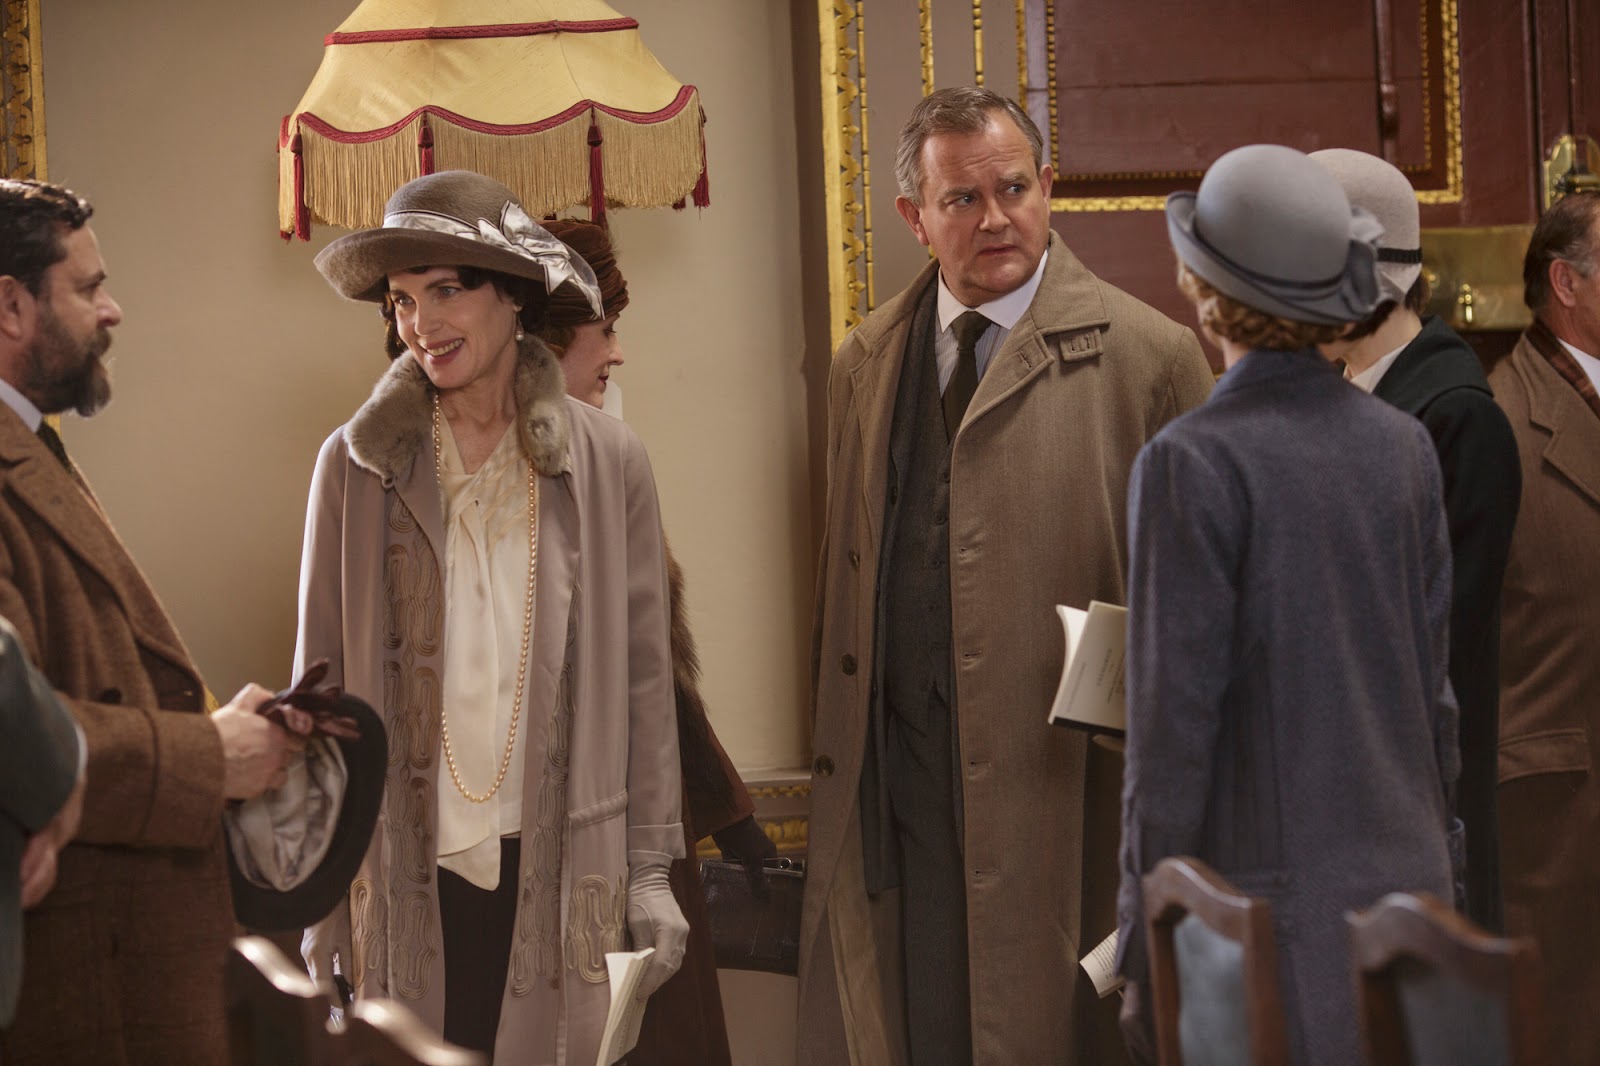 DOWNTON ABBEY Season 6 Trailers and Pictures | The Entertainment Factor1600 x 1066